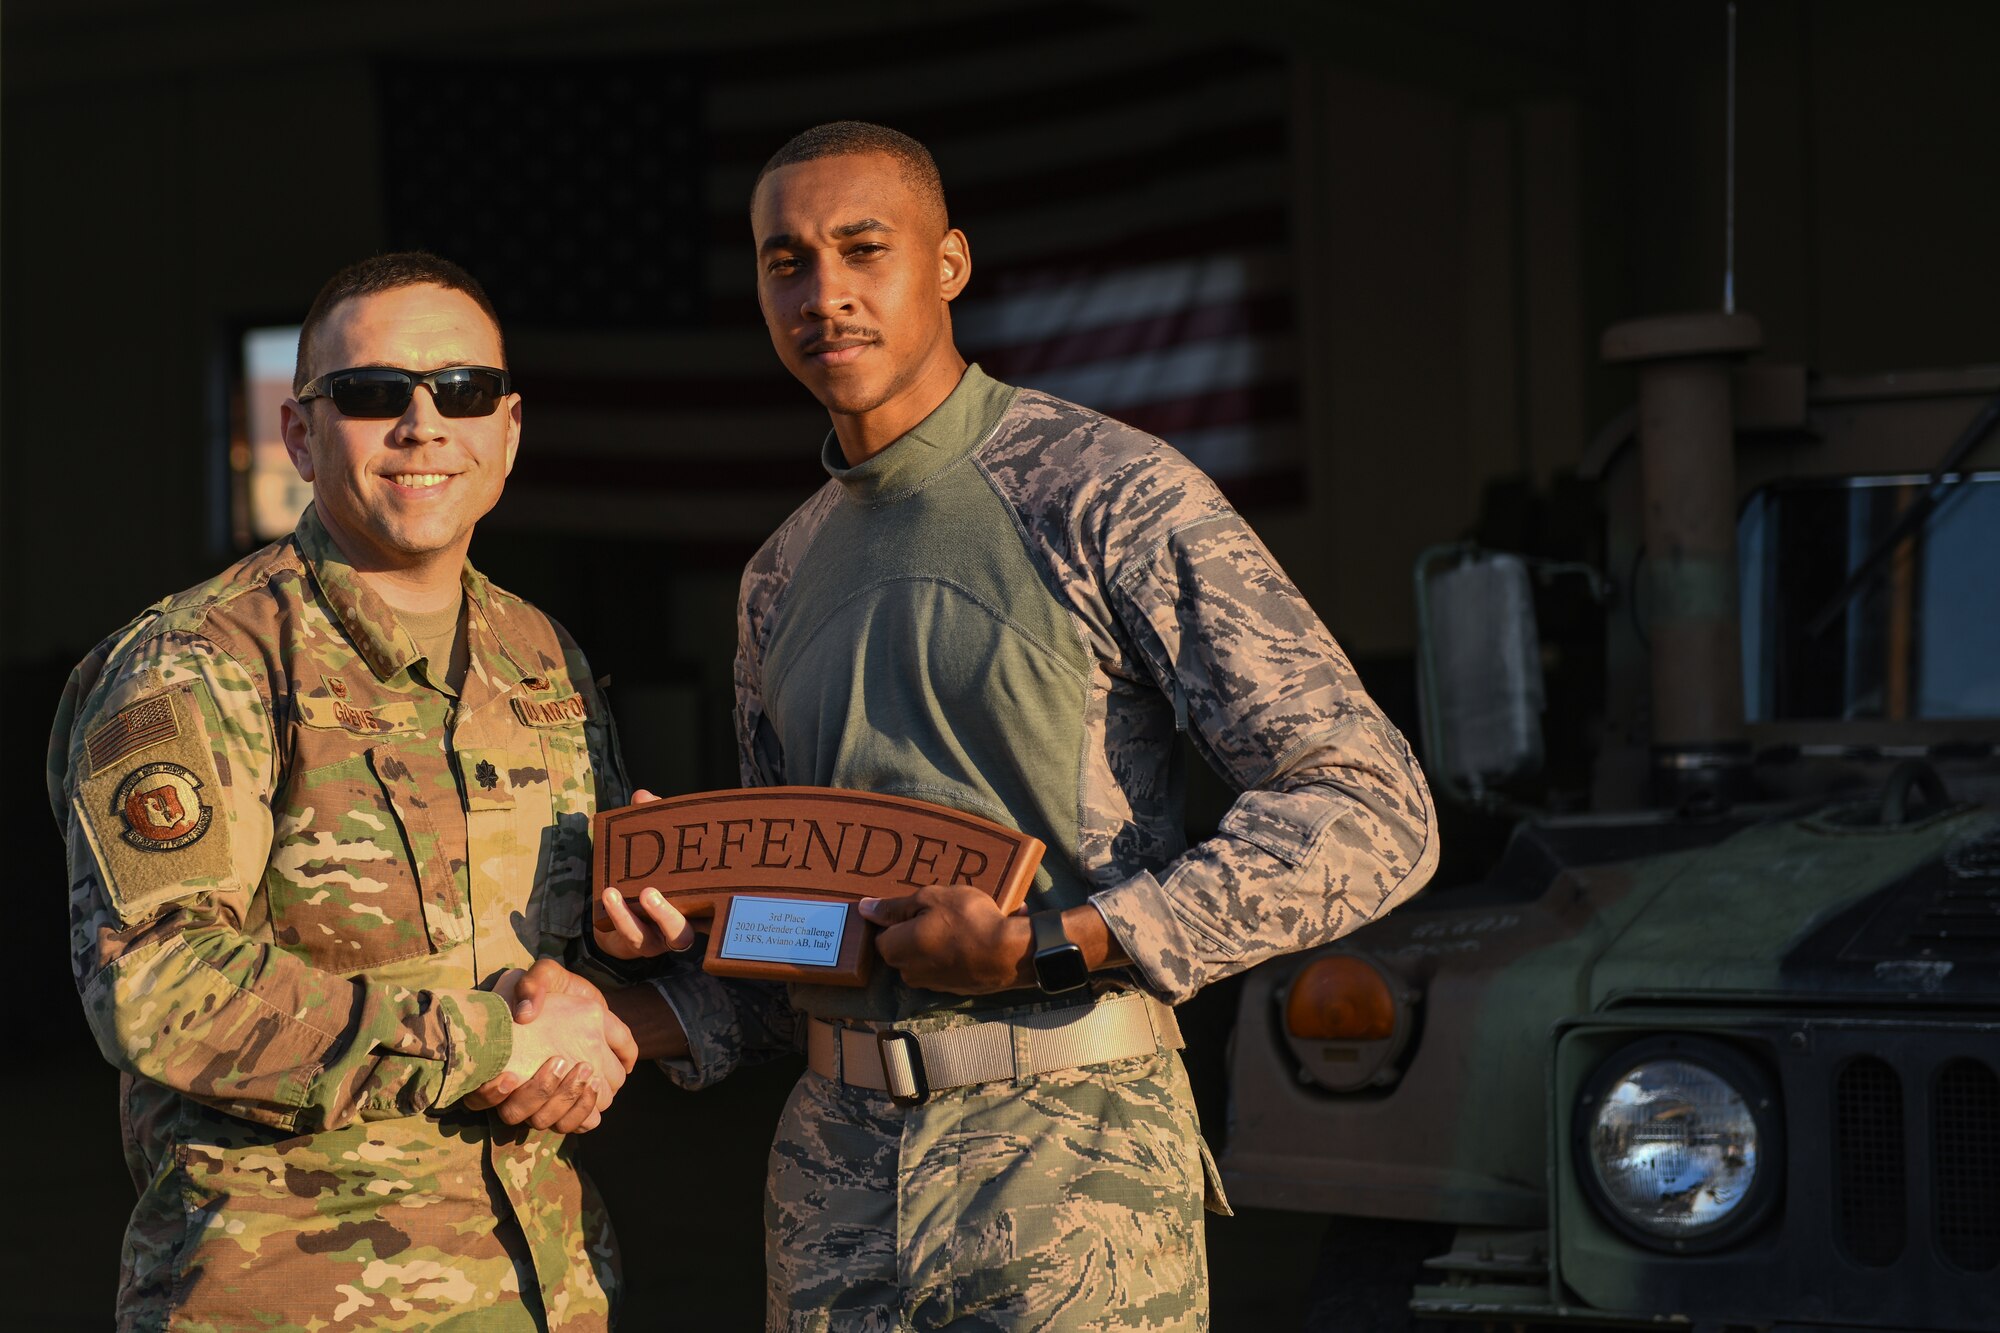 U.S. Air Force Lt. Col. Jesse Goens, 31st Security Forces Squadron commander, presents Aviano’s 2020 Defender Challenge award to U.S. Air Force Airman 1st Class Marcus Lafleur, 31st SFS member at Aviano Air Base, Italy, Feb. 14, 2020. Lafleur won third place. (U.S. Air Force photo by Airman 1st Class Ericka A. Woolever)